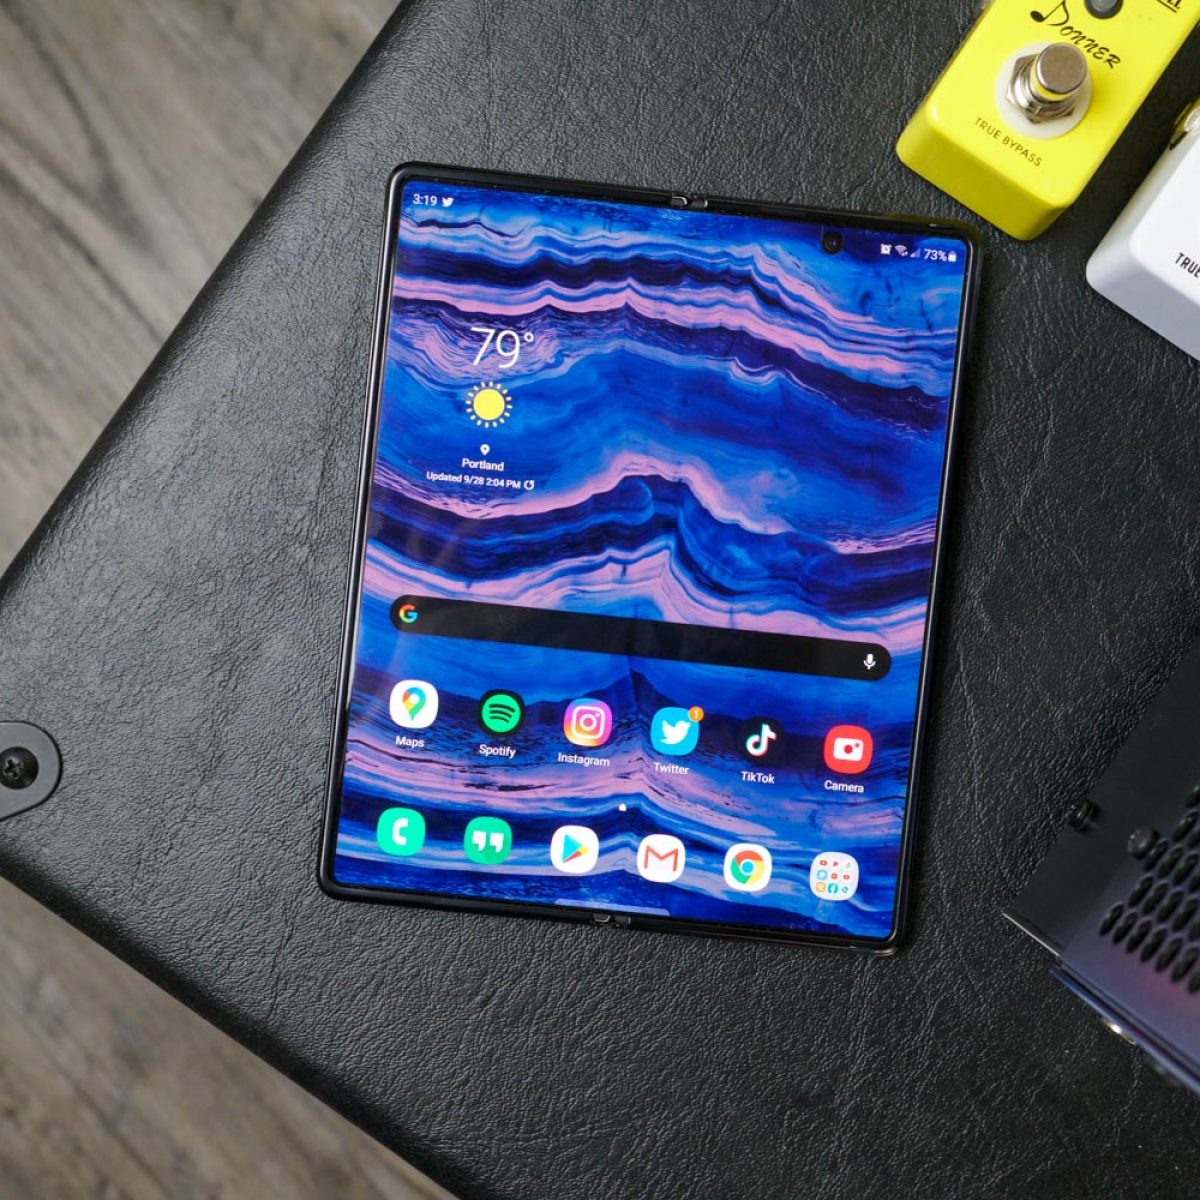 The Galaxy Z Fold 3 will support the S Pen Pro, according to FCC